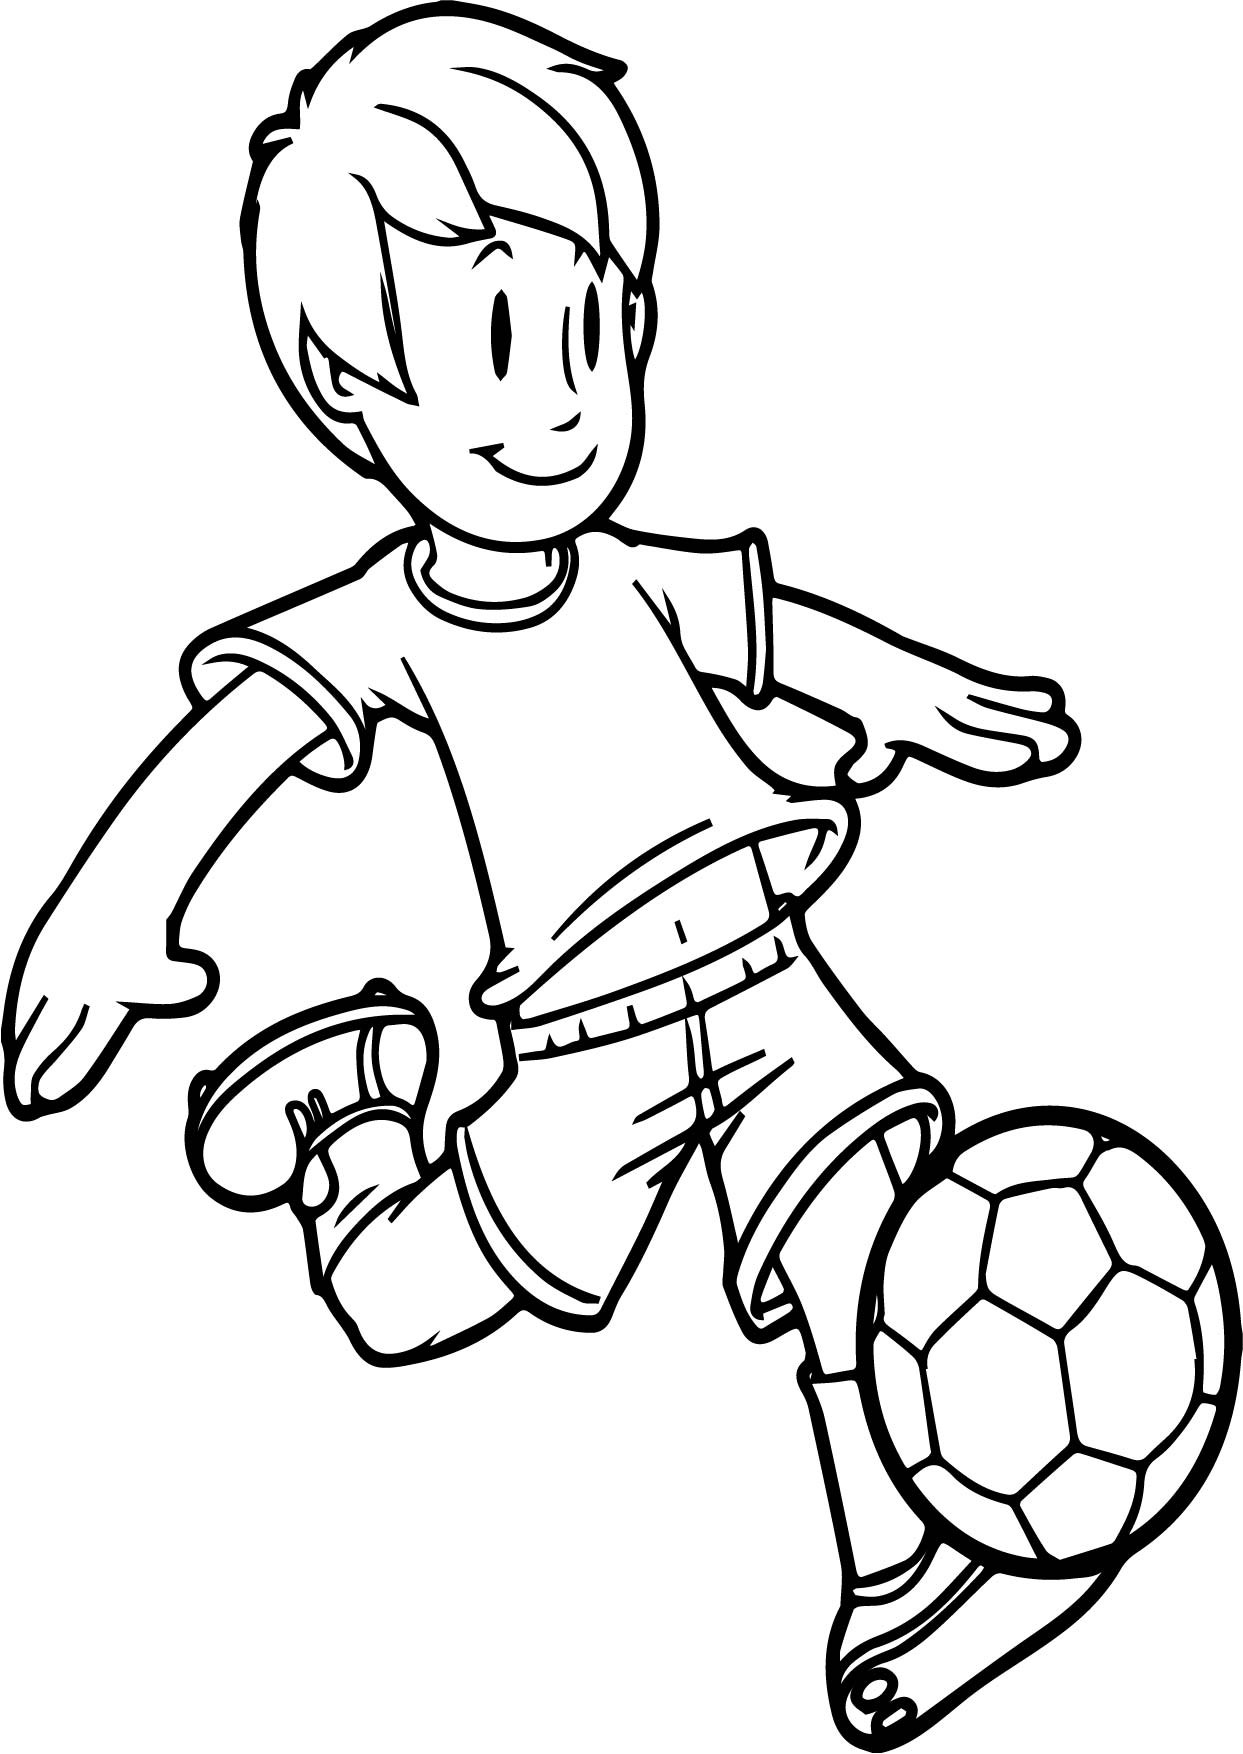 Coloring Pages For Boys Soccer
 Soccer Drawing at GetDrawings